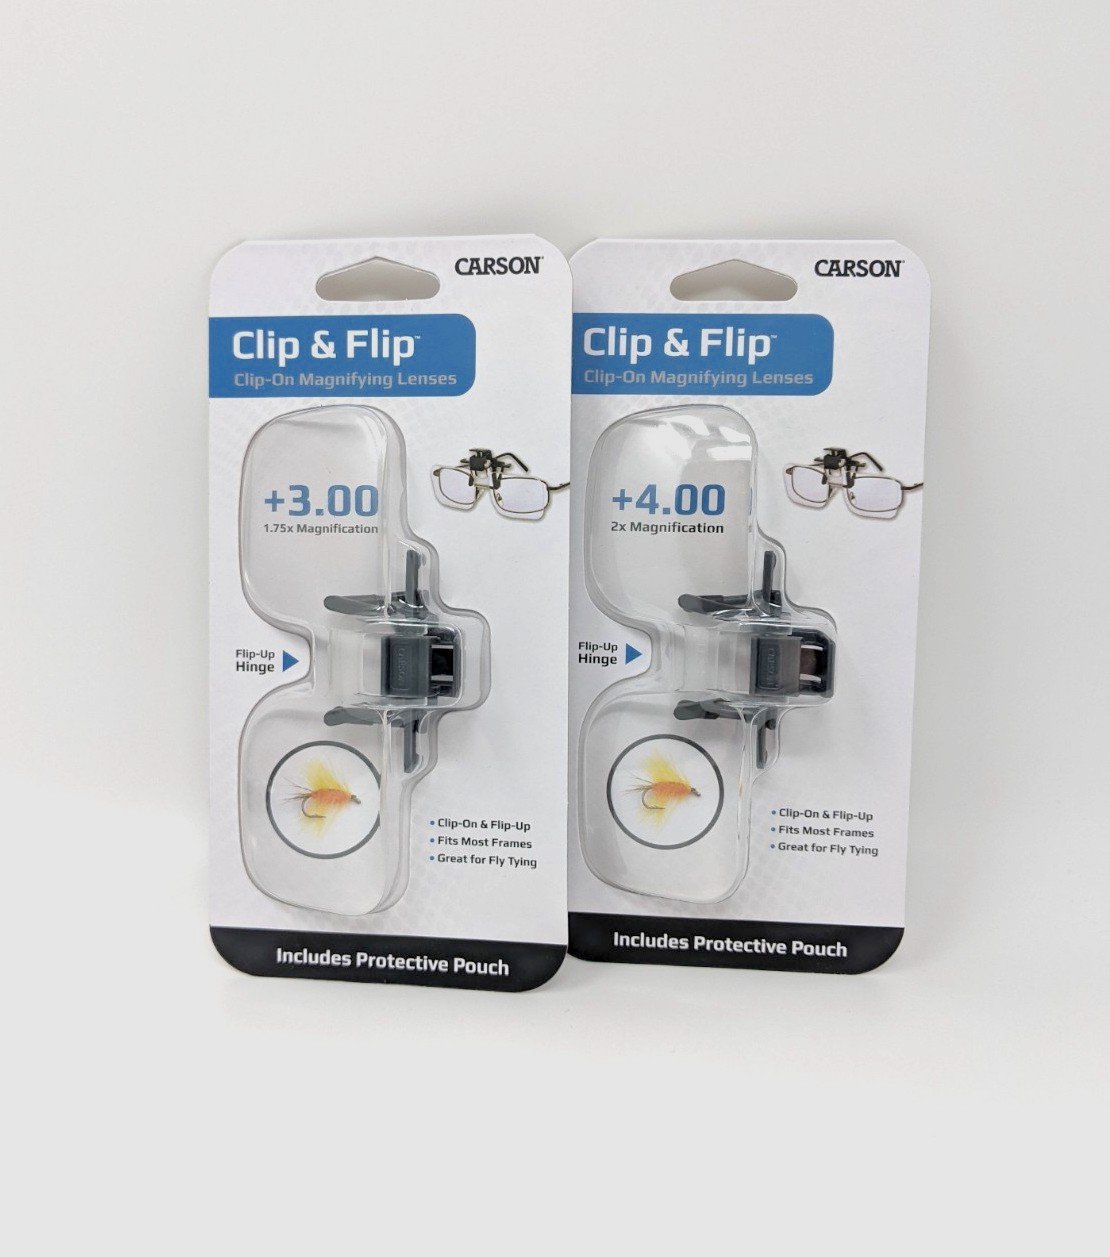 Carson Clip & Flip Magnifying Glasses at The Fly Shop